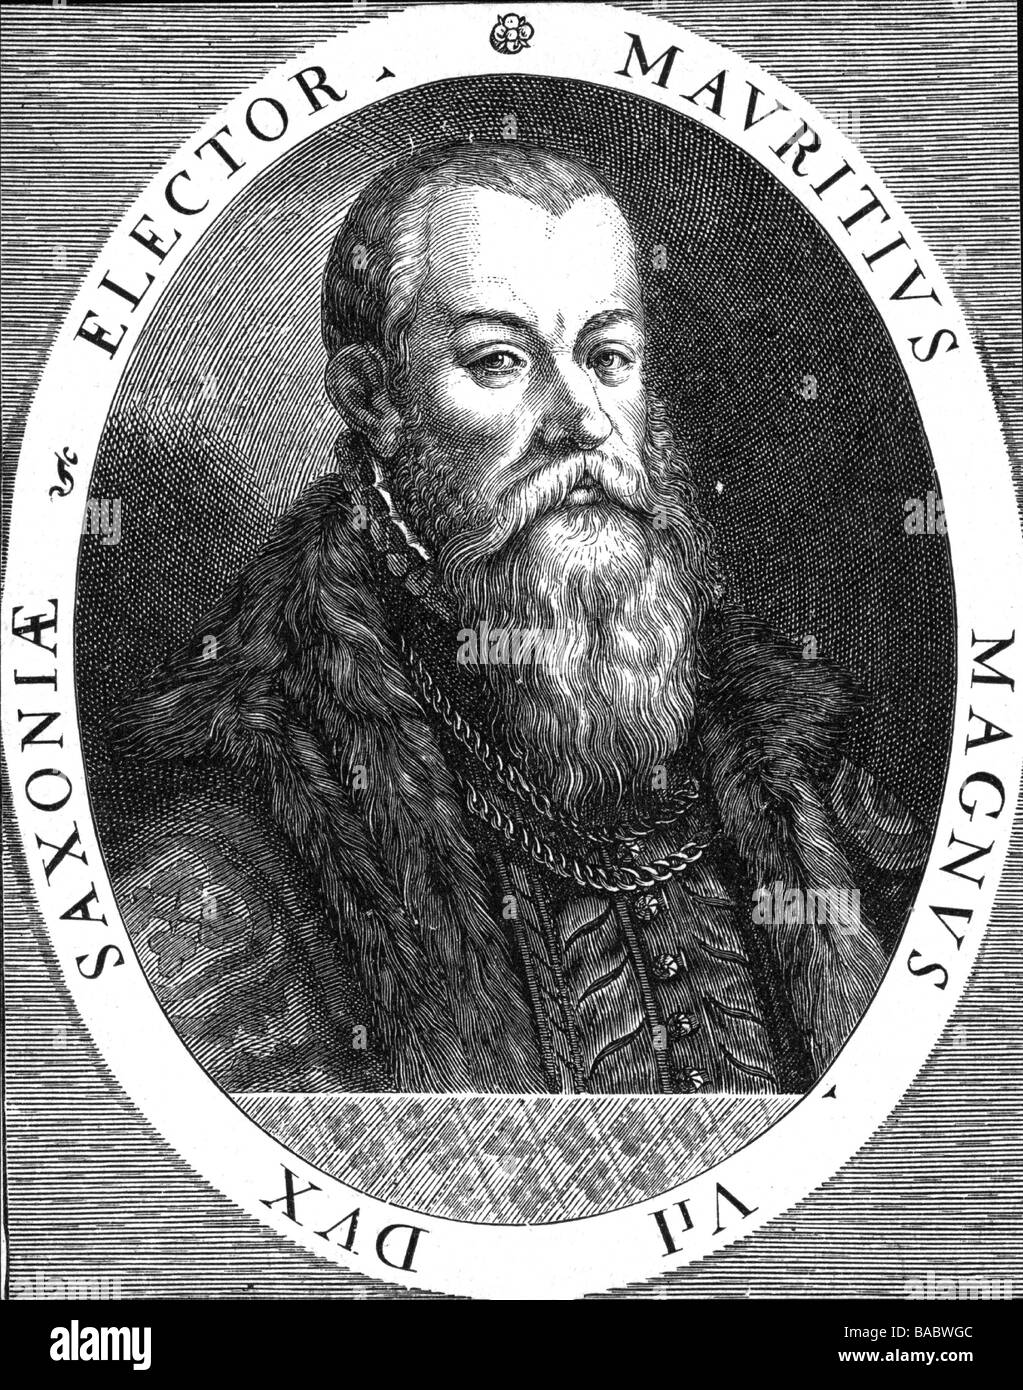 Maurice, 21.3.1521 - 11.7.1553, Elector of Saxony from 4.6.1547, portrait, copper engraving by Lukas Cranach the Older, 16th century, Artist's Copyright has not to be cleared Stock Photo